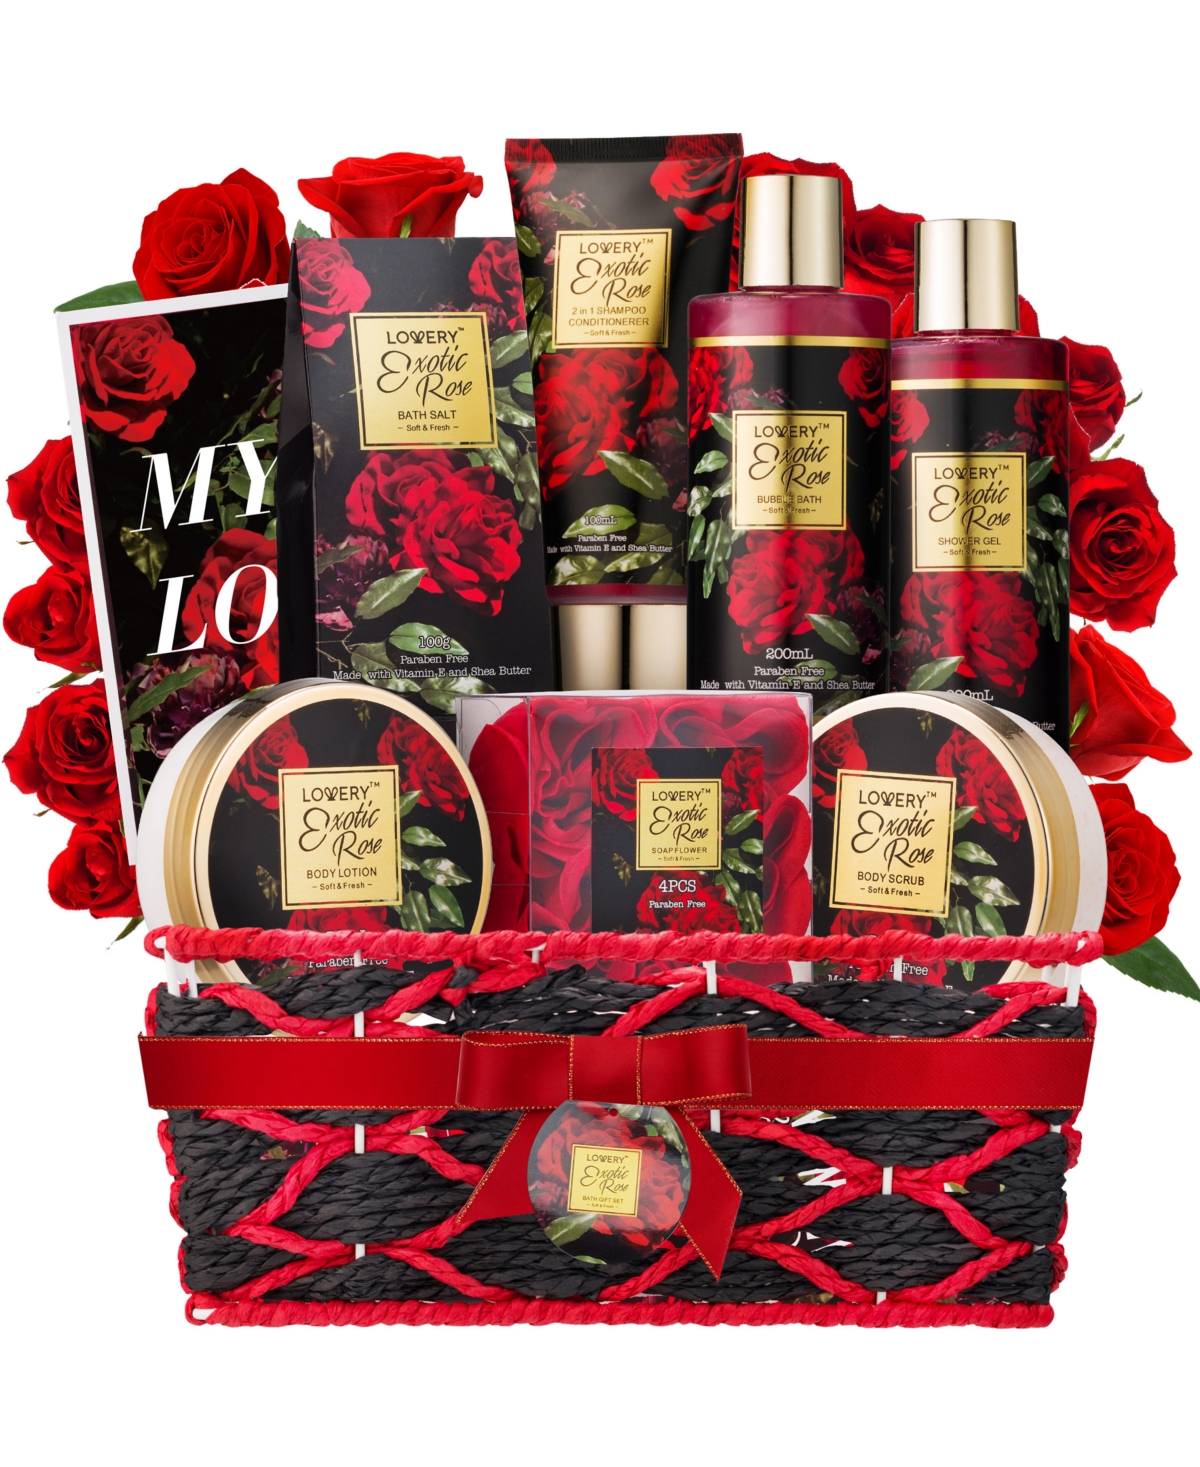 Lovery Exotic Rose Spa Gift Basket, Self Care Gift, Bath and Body Care Gift Set, Relaxing Stress Relief Gift, 13 Piece